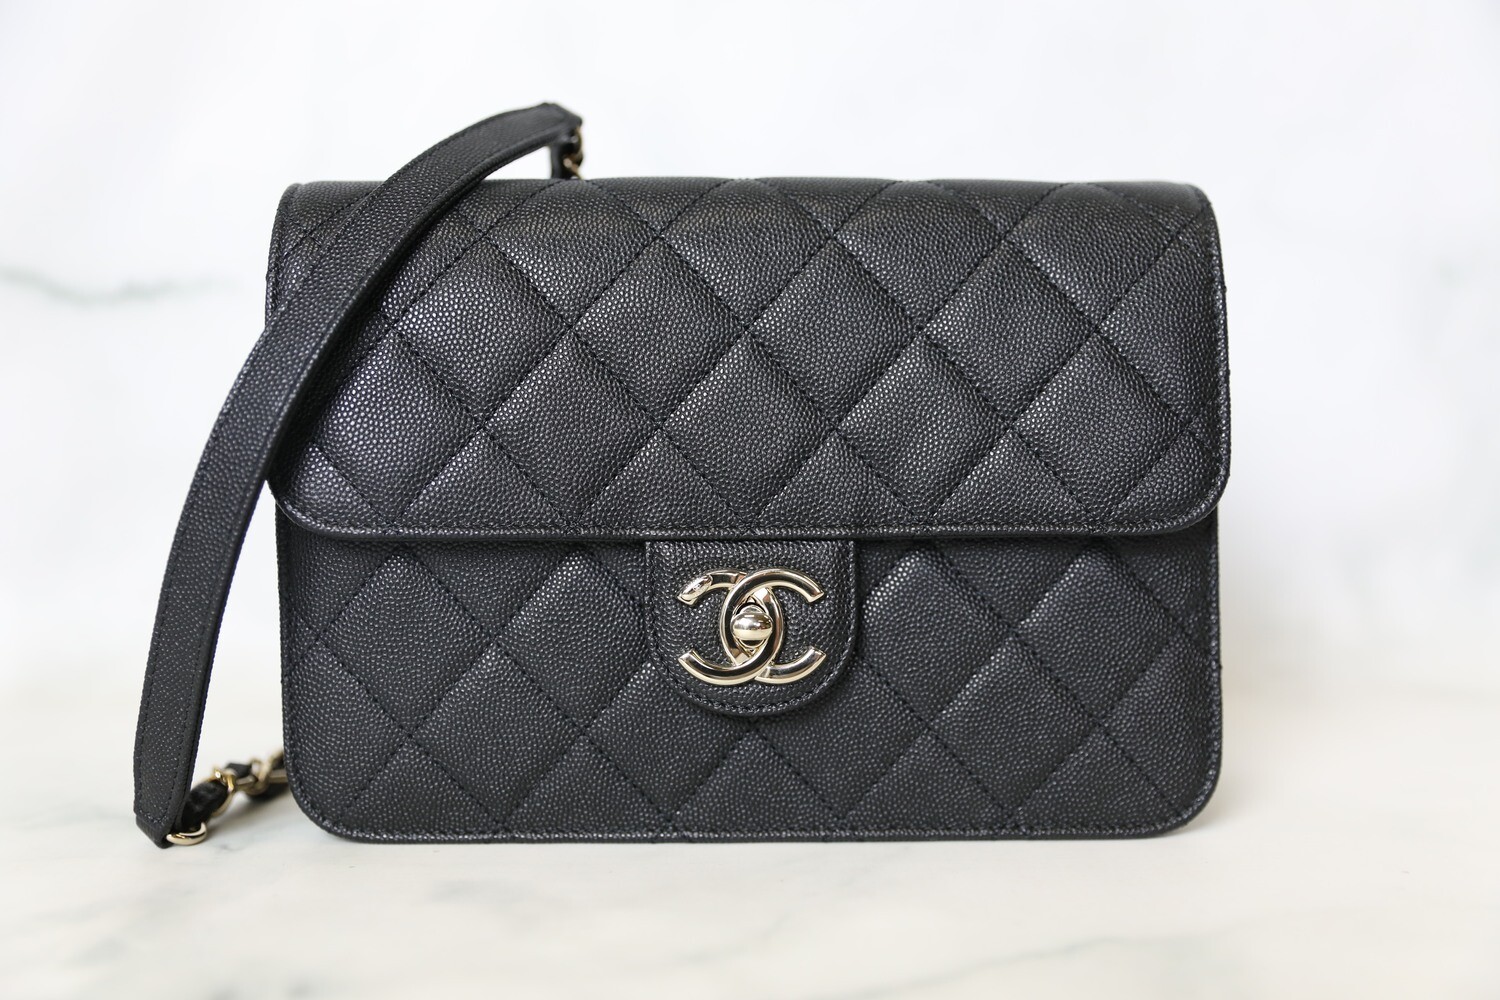 Chanel Like a Wallet Flap Medium, Black Caviar with Gold Hardware